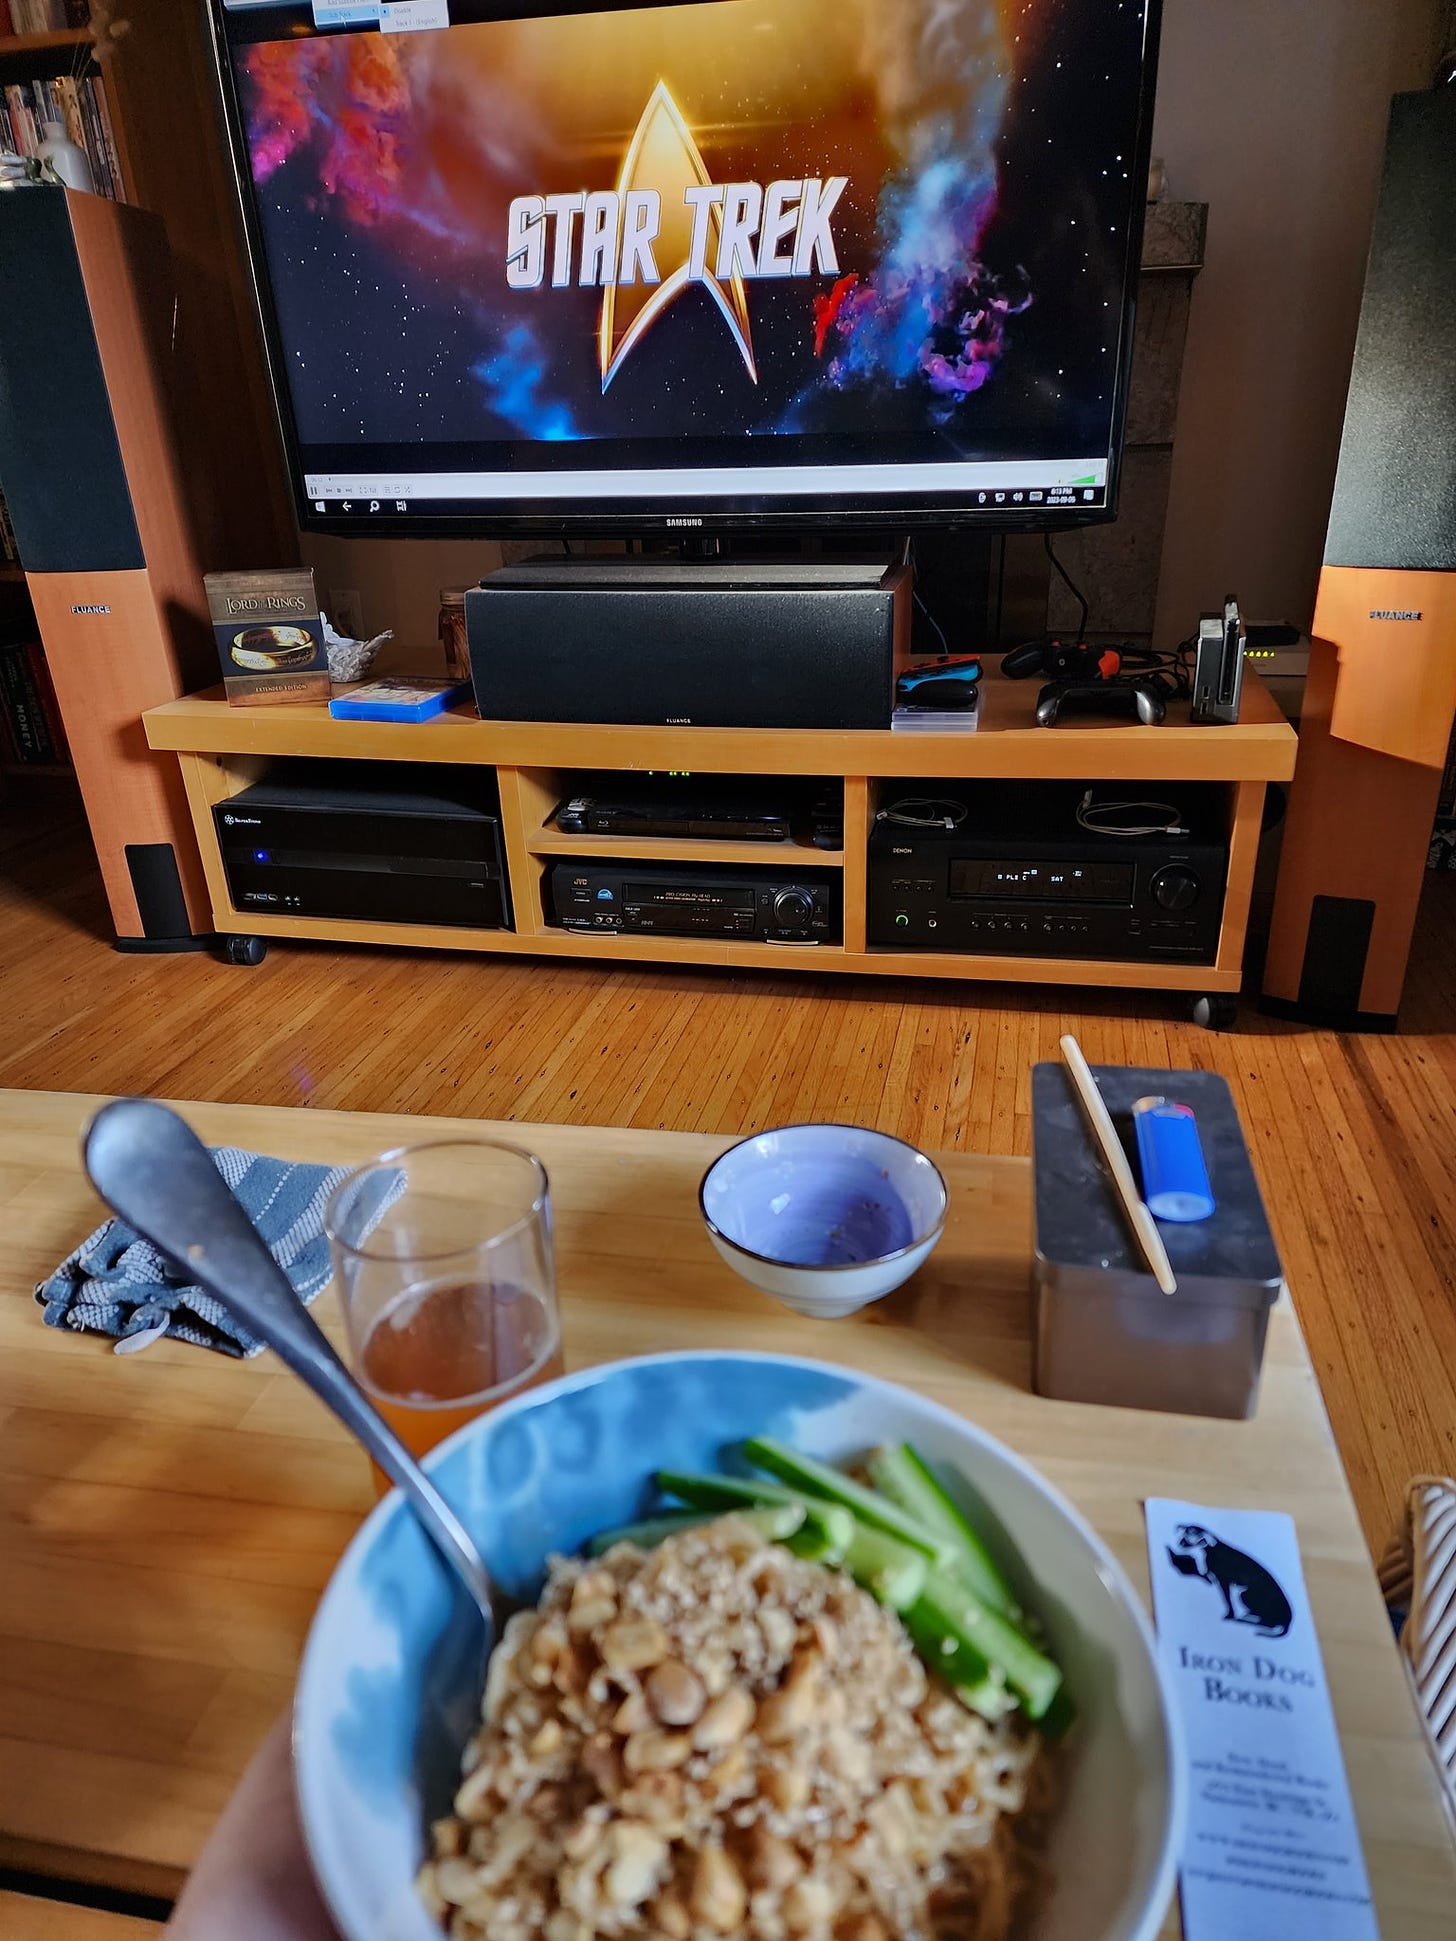 In the foreground, blurred, is a bowl of noodles in the sauce described above, topped with peanuts and with cucumber matchsticks on one side. The coffee table is visible behind it, with a few random things on it, and in focus in the background is the tv with the Star Trek title card.